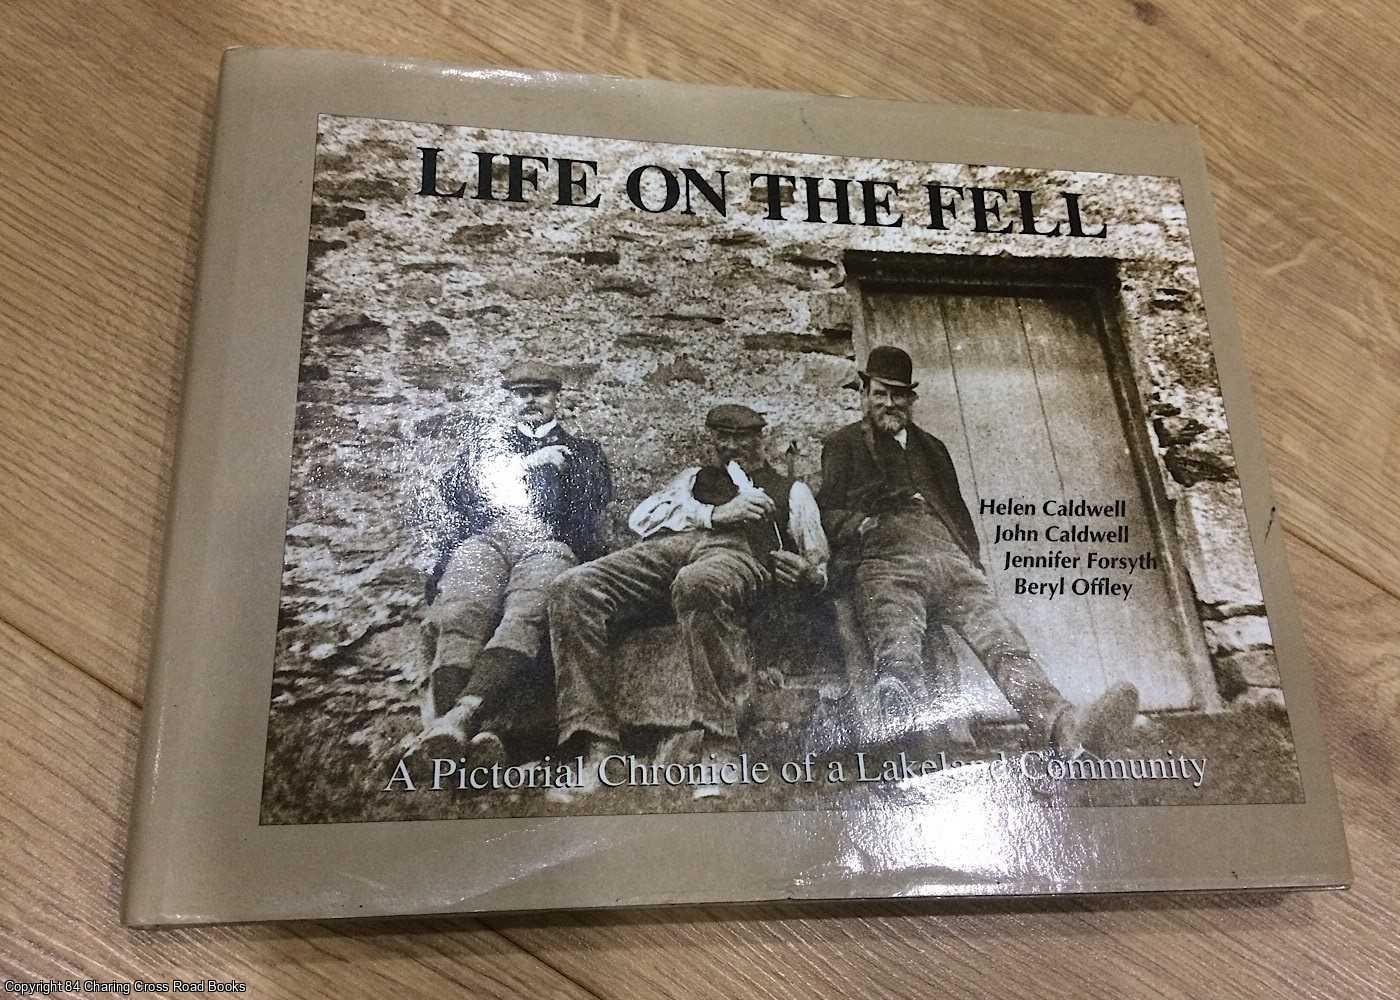 Caldwell, John; Caldwell, Helen; Forsyth; Offley - Life on the Fell: A Pictorial Chronicle of a Lakeland Community